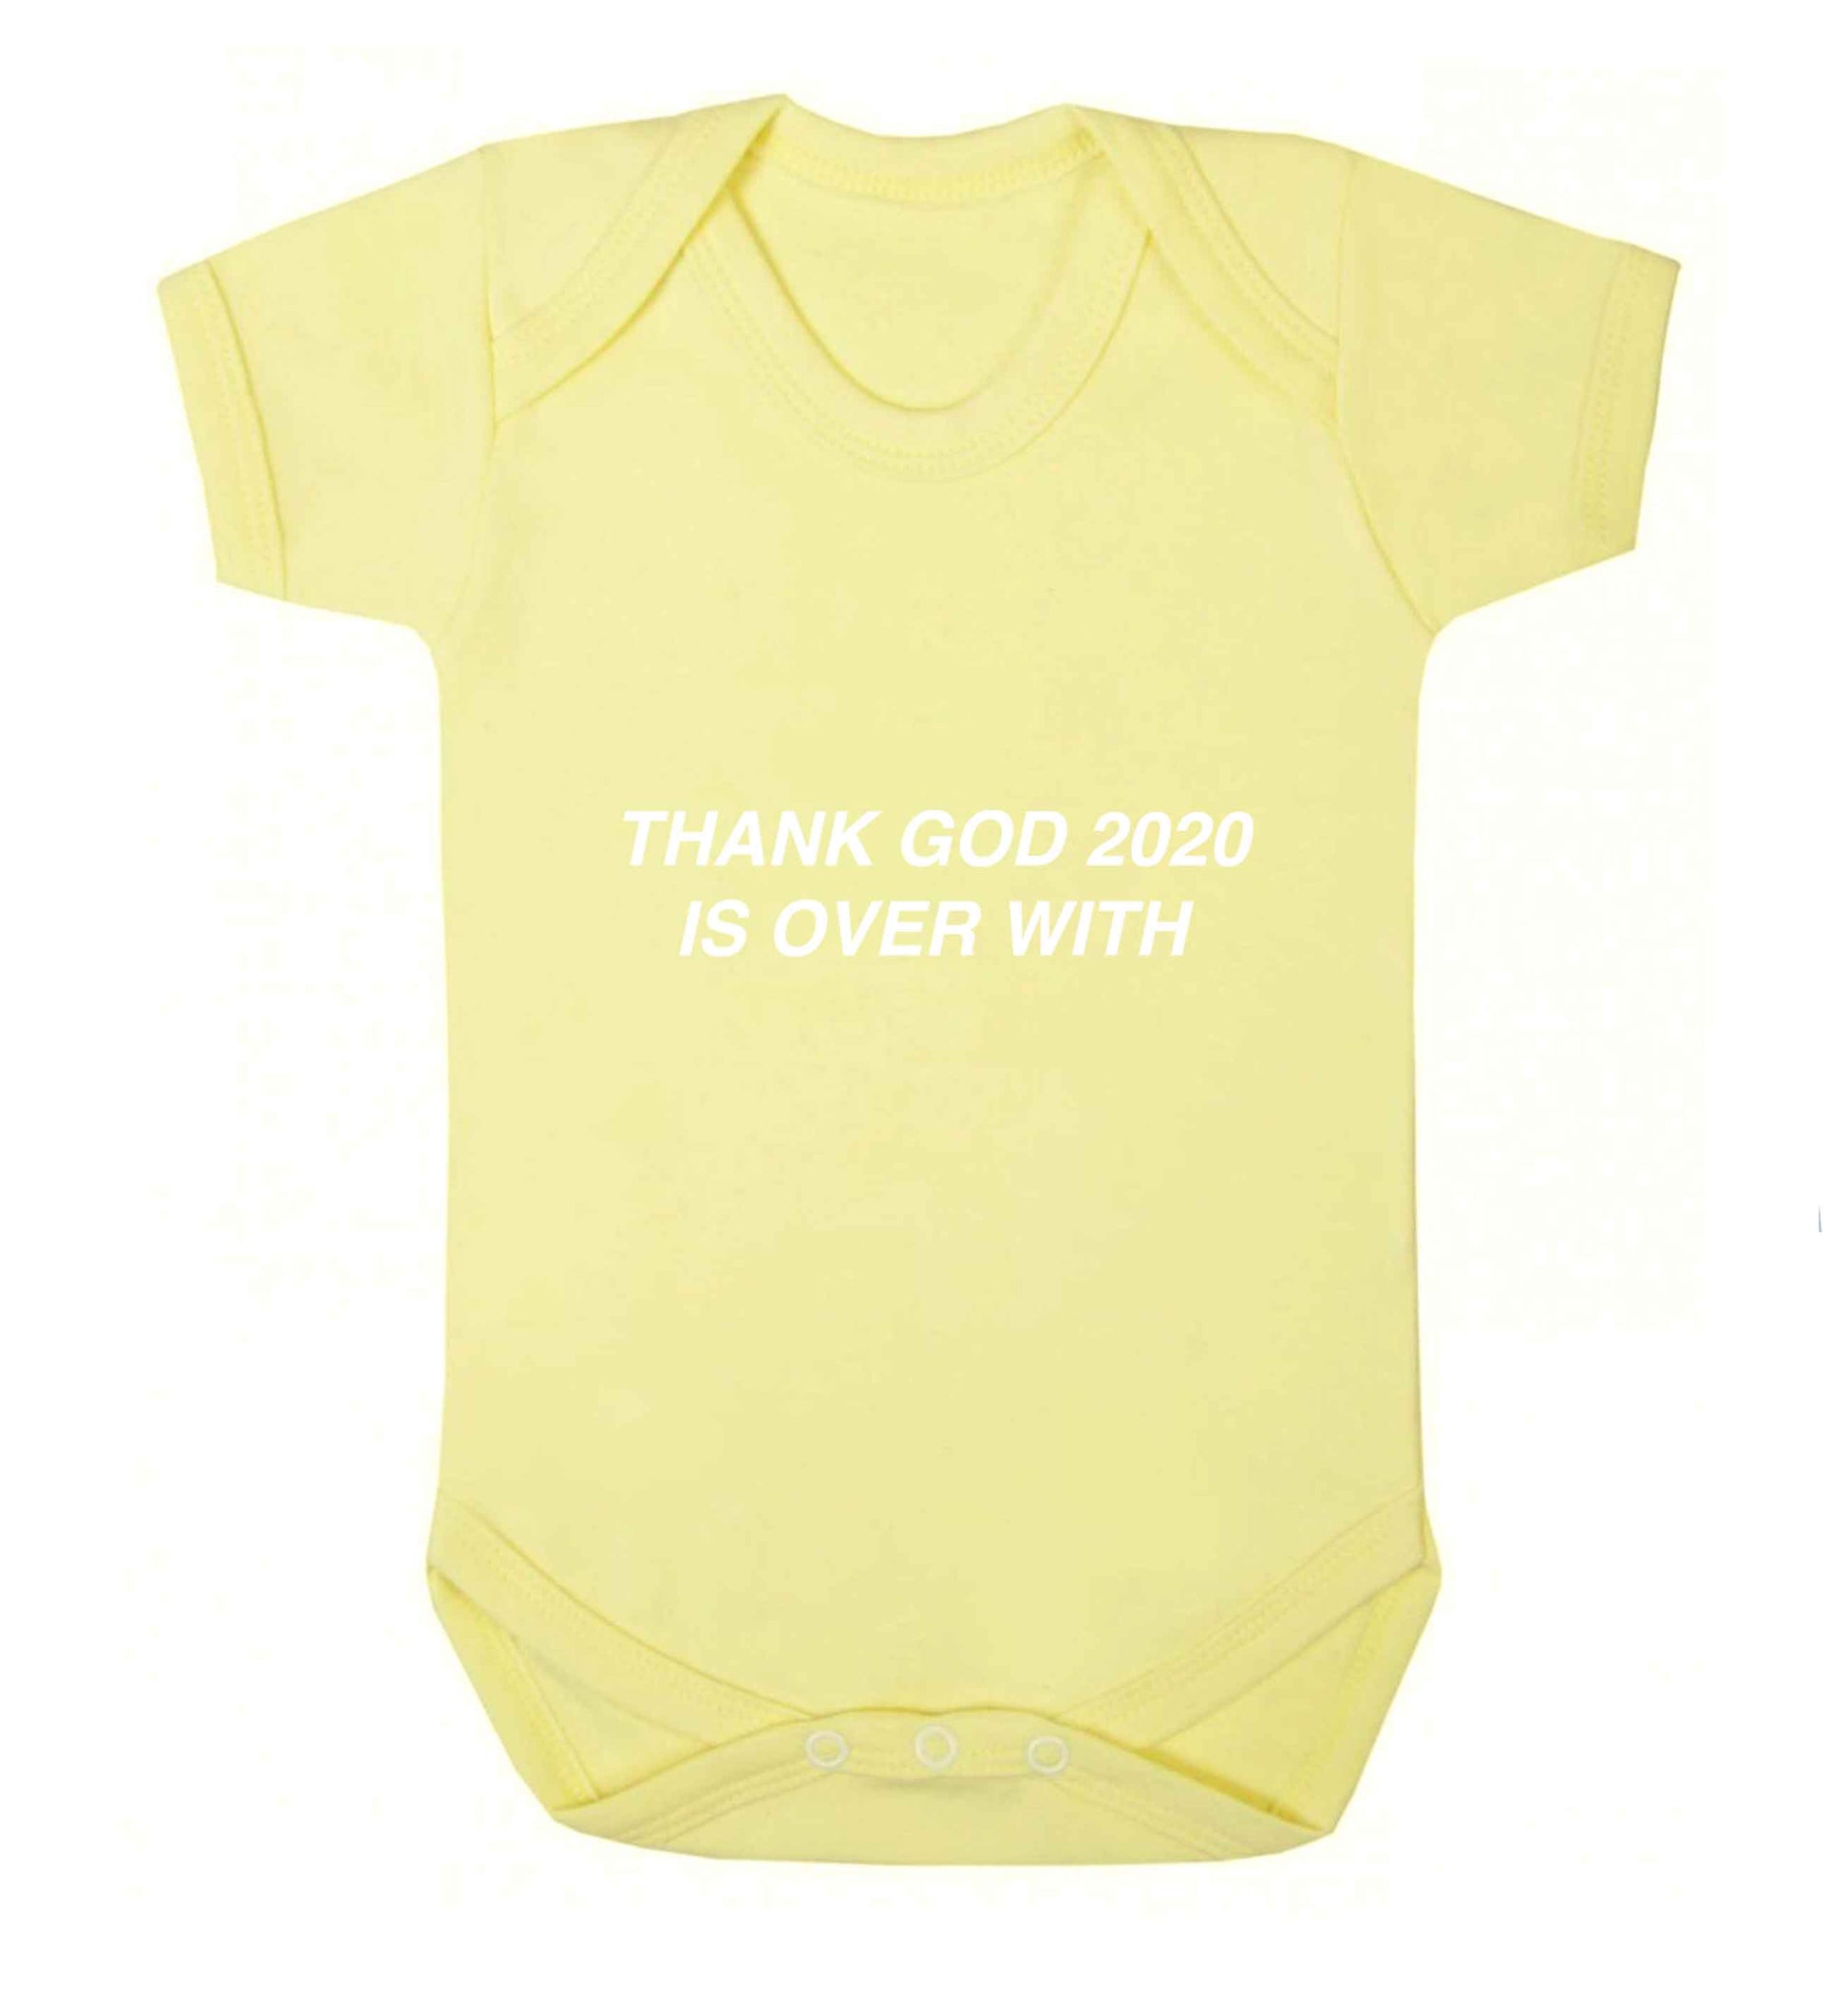 Thank god 2020 is over with baby vest pale yellow 18-24 months